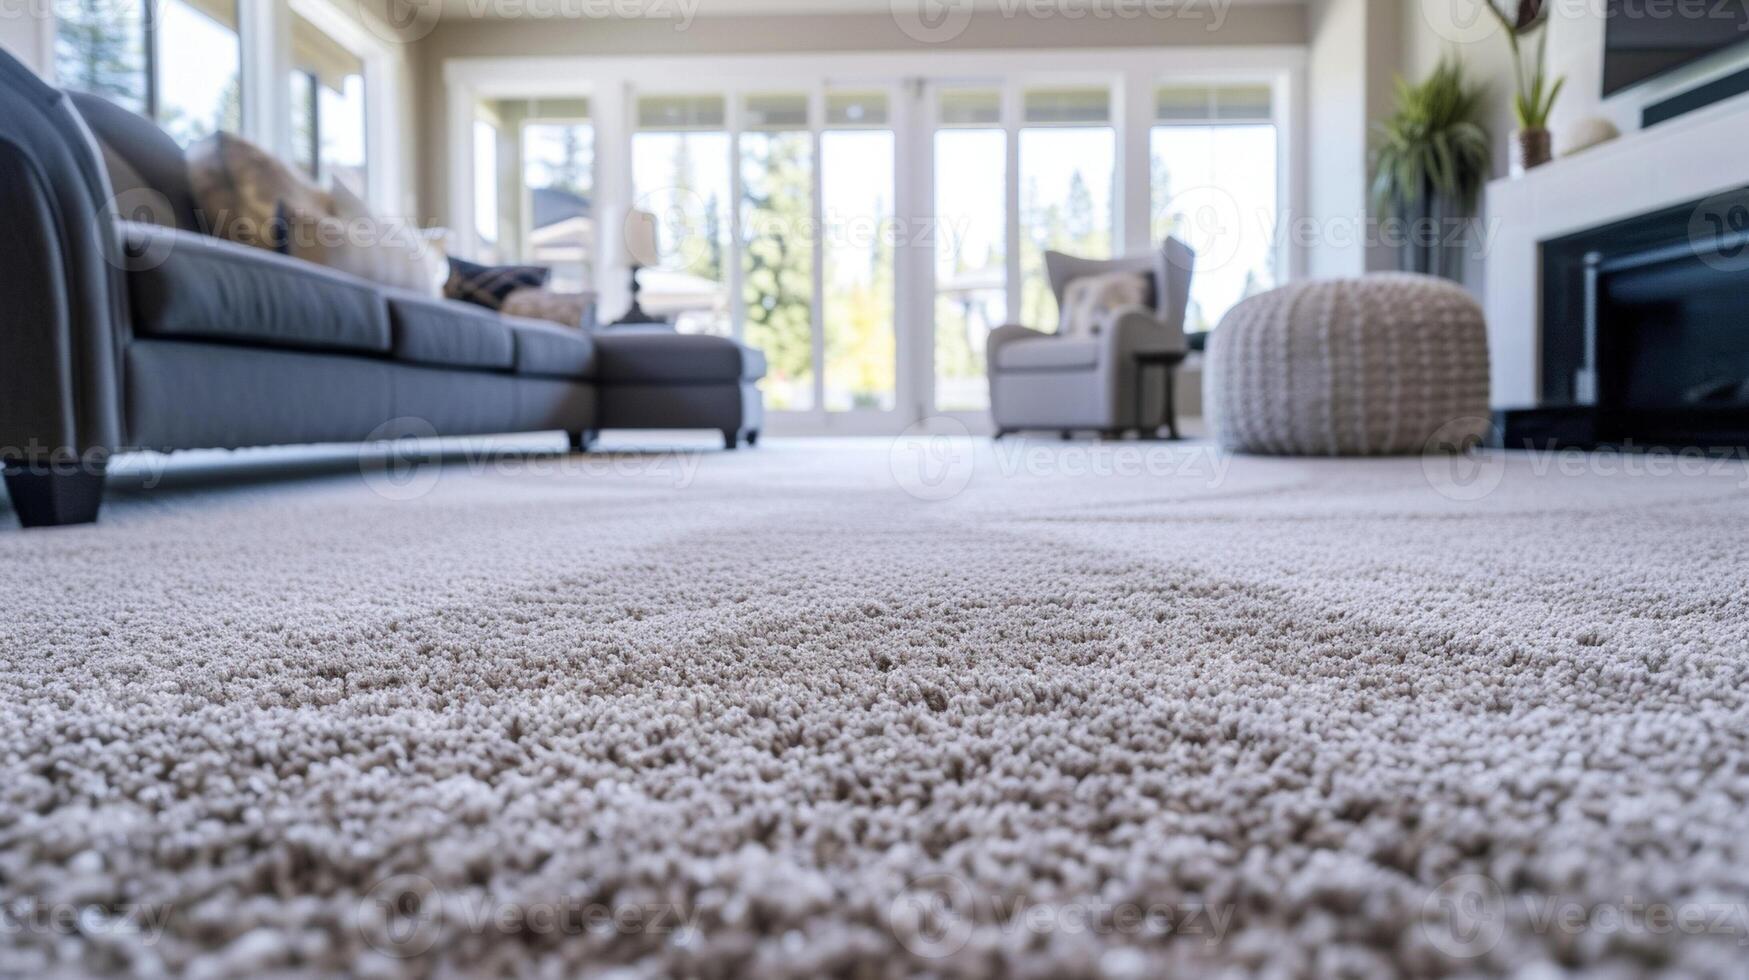 Need to update your old and wornout carpet Let our flooring spets work their magic and bring life back to your home. This picture showcases a plush and luxurious carpet installatio photo